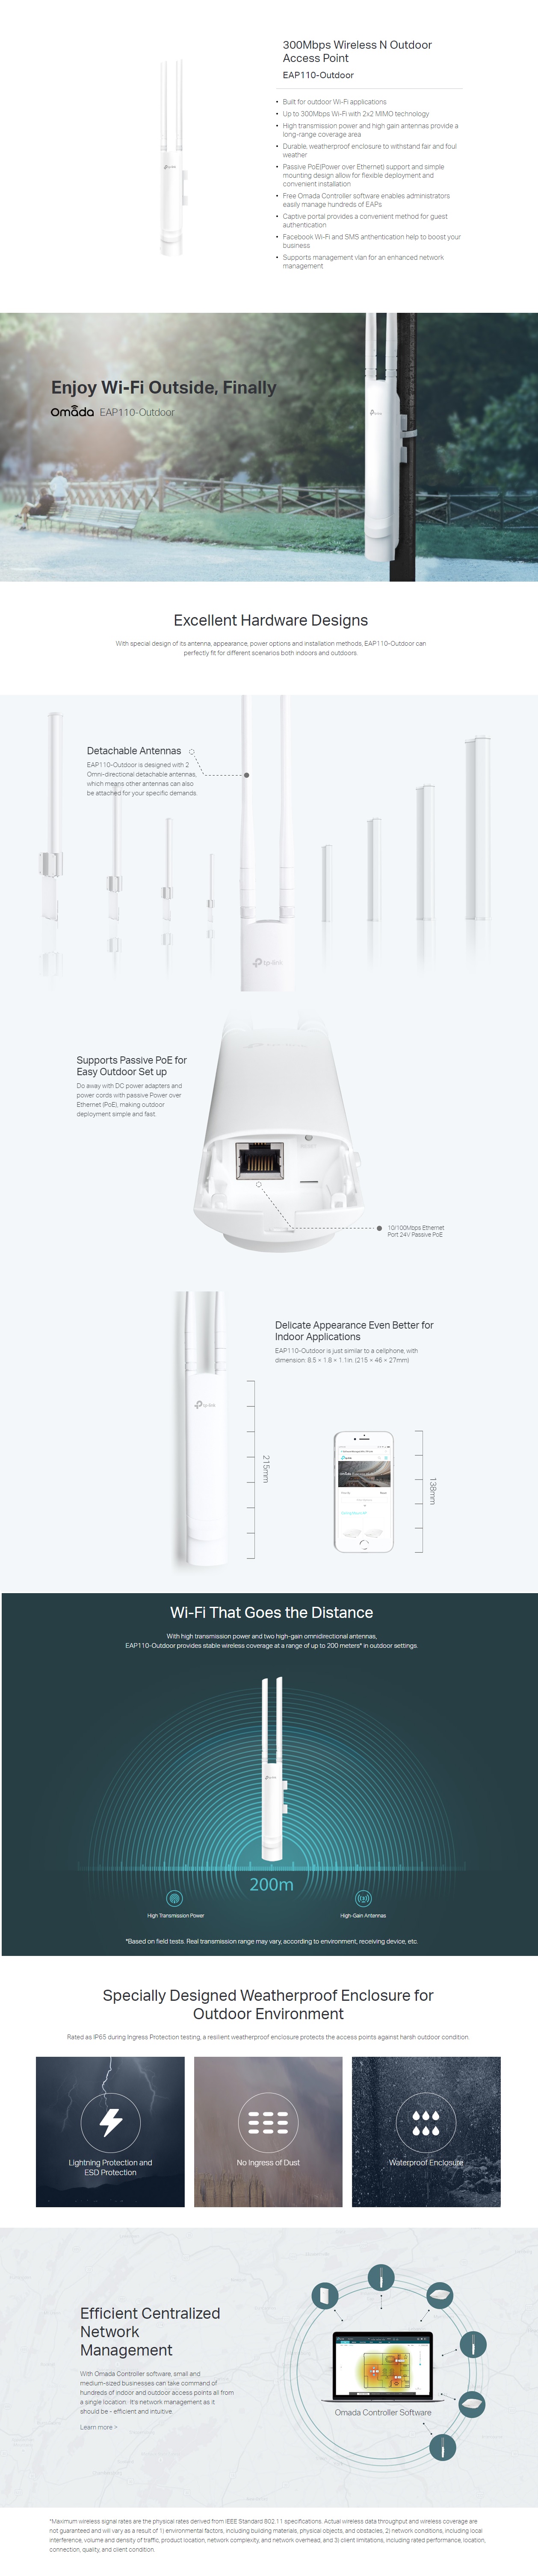  Access Point: 300Mbps Wireless N Outdoor Access Point, Qualcomm, 300Mbps at 2.4GHz, 802.11b/g/n, 1 10/100Mbps LAN, Passive PoE Supported, Centralized Management, Captive Portal, Multi-SSID, 5dBi external omni antennas, Pole Mounting  